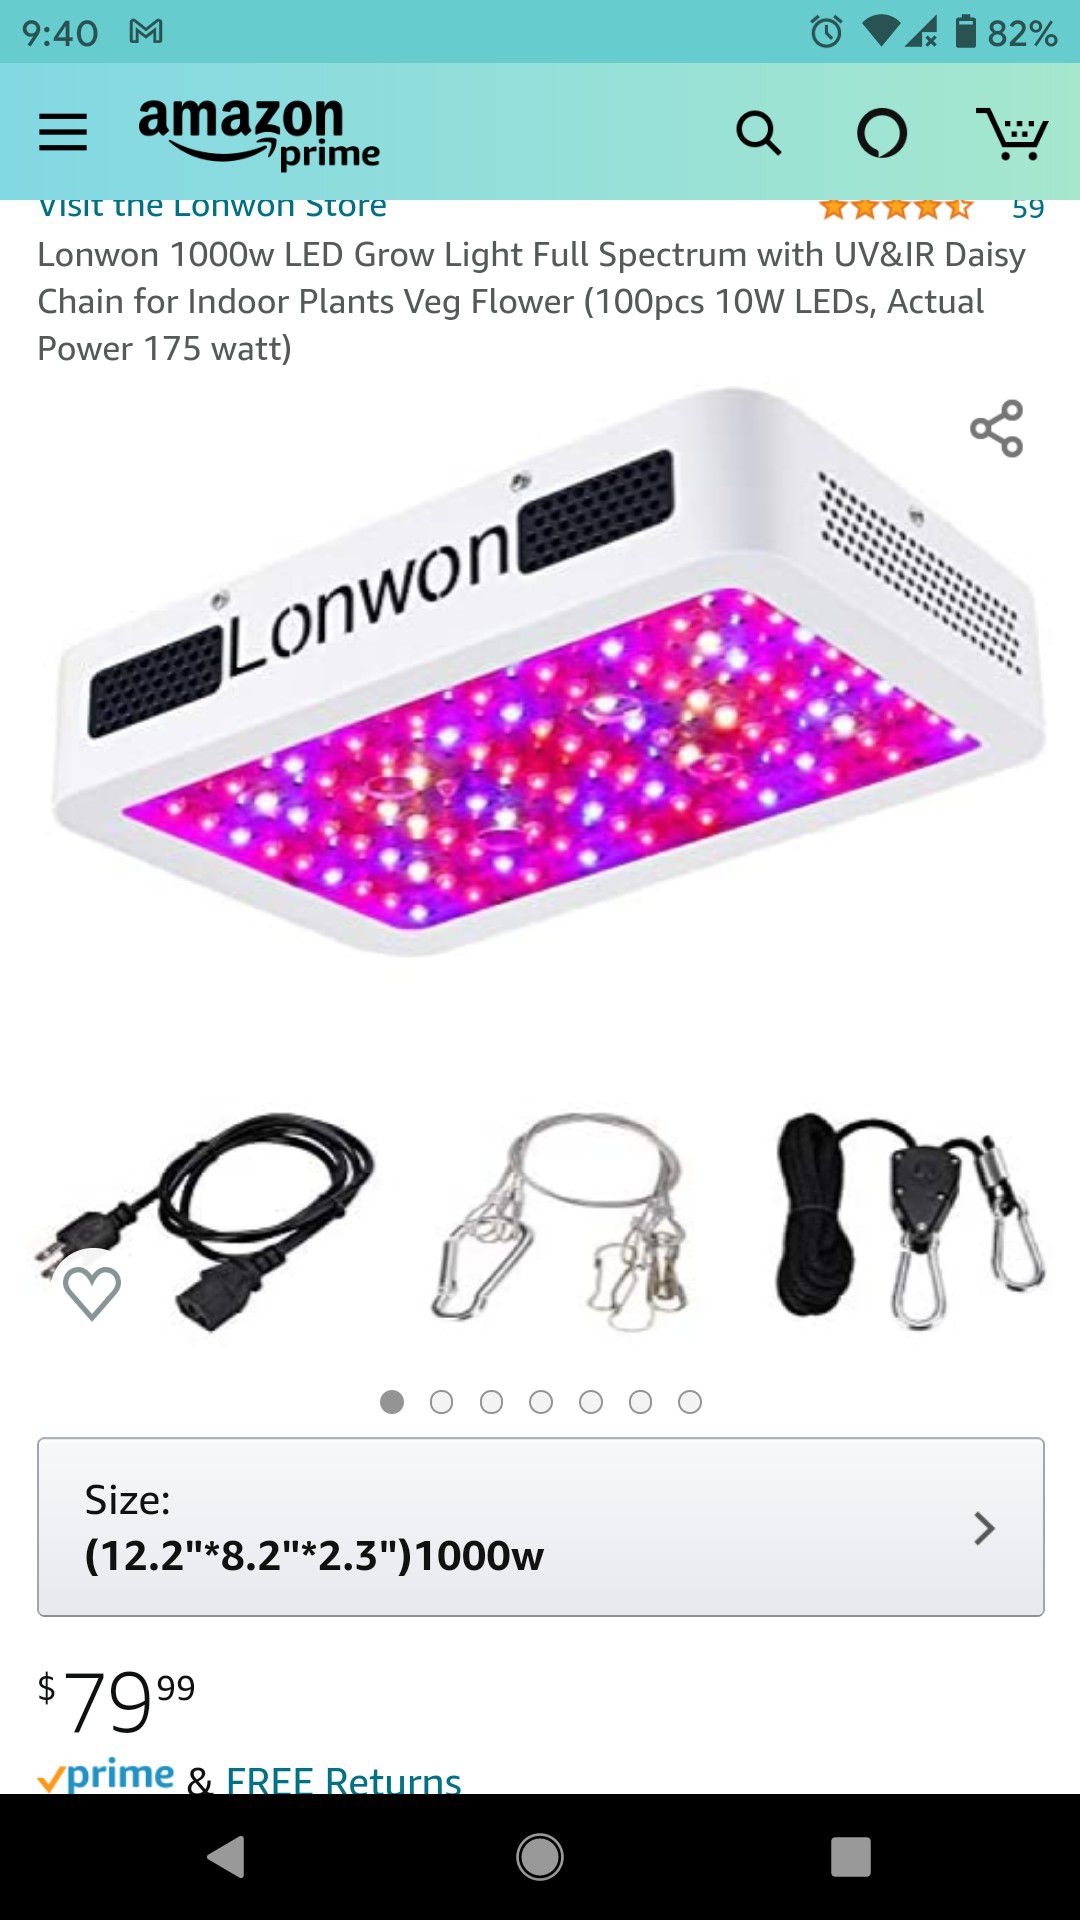 1000w LED Grow Light for Indoor Plants